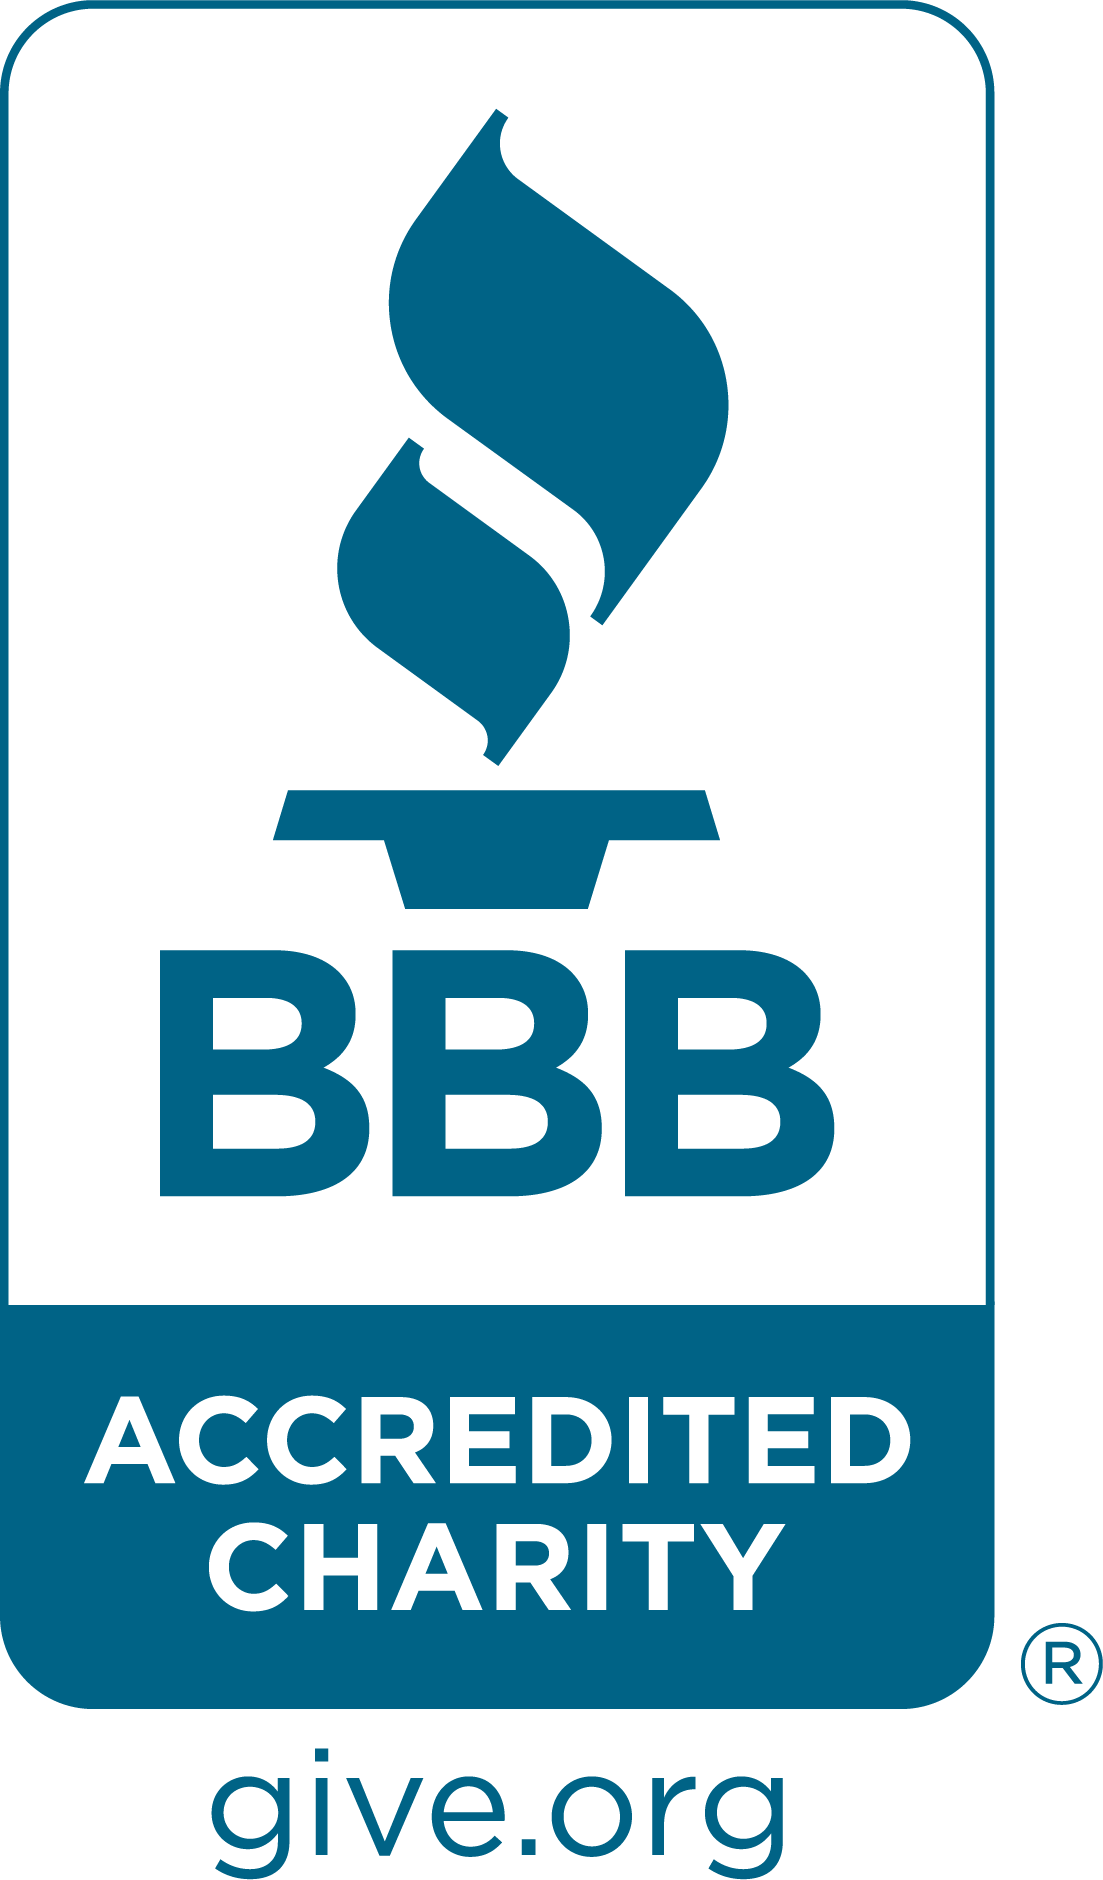 Better Business Bureau: Accredited Charity